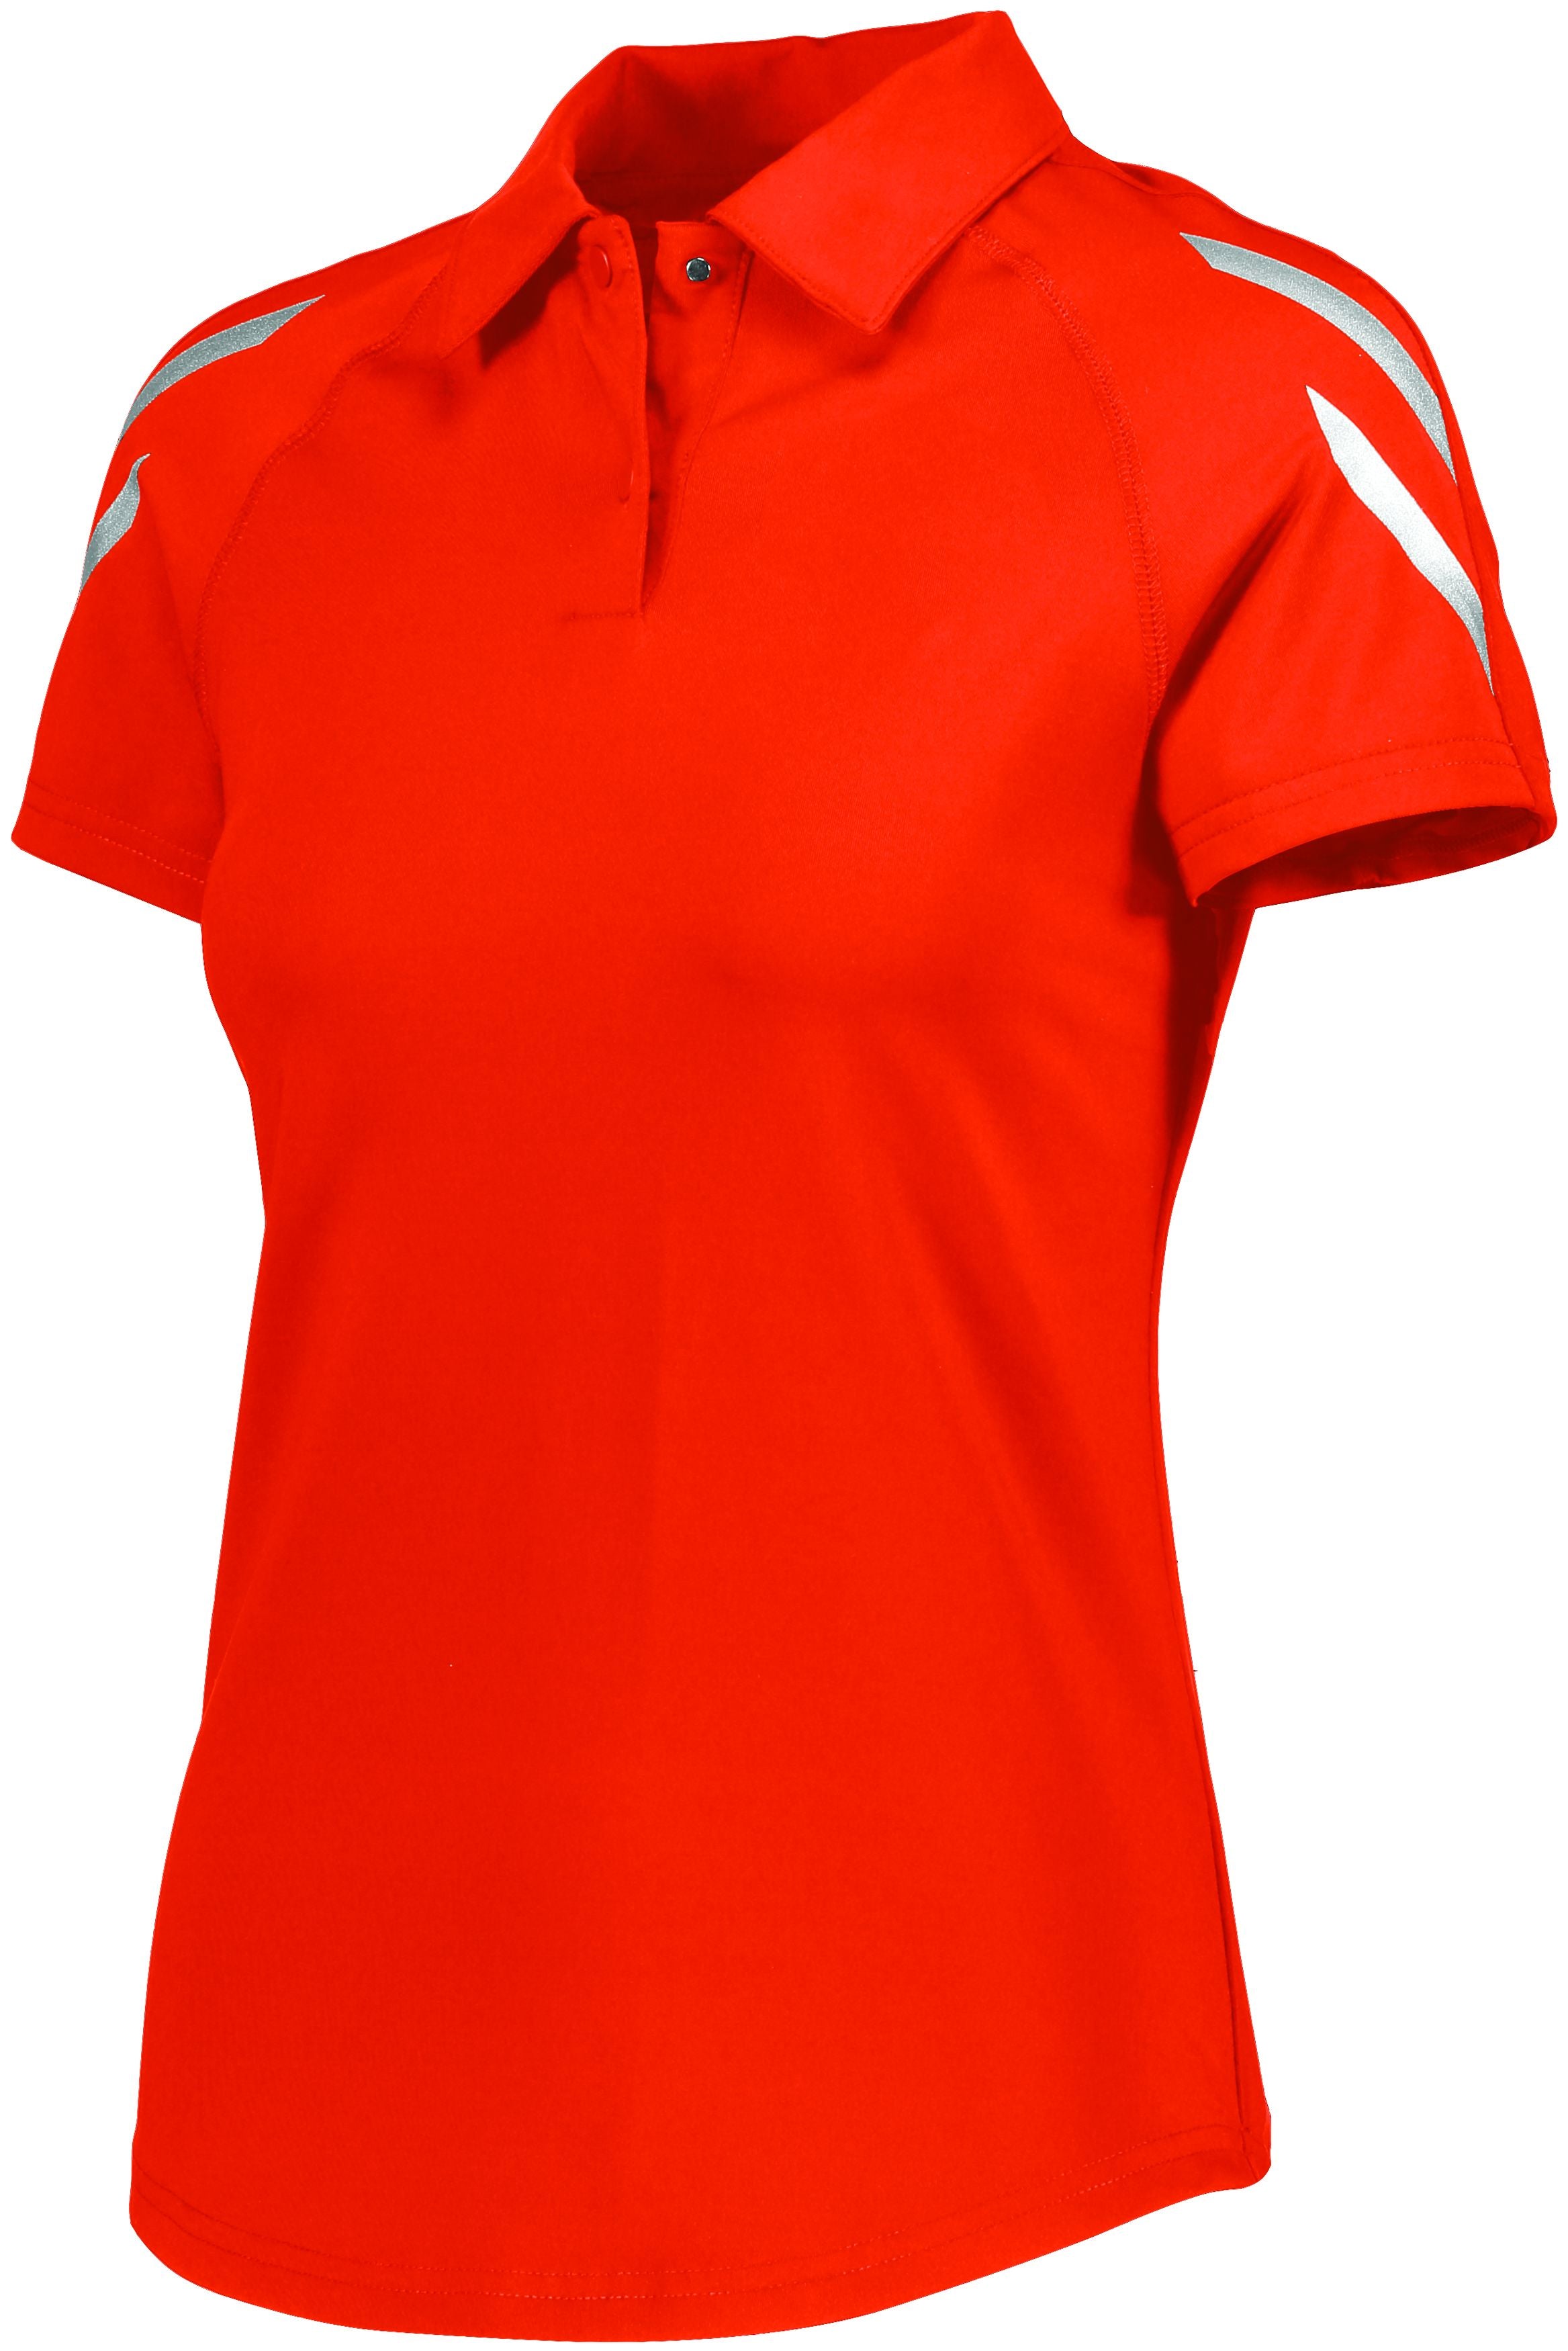 Holloway Ladies Flux Polo in Orange  -Part of the Ladies, Ladies-Polo, Polos, Holloway, Shirts, Flux-Collection, Corporate-Collection product lines at KanaleyCreations.com